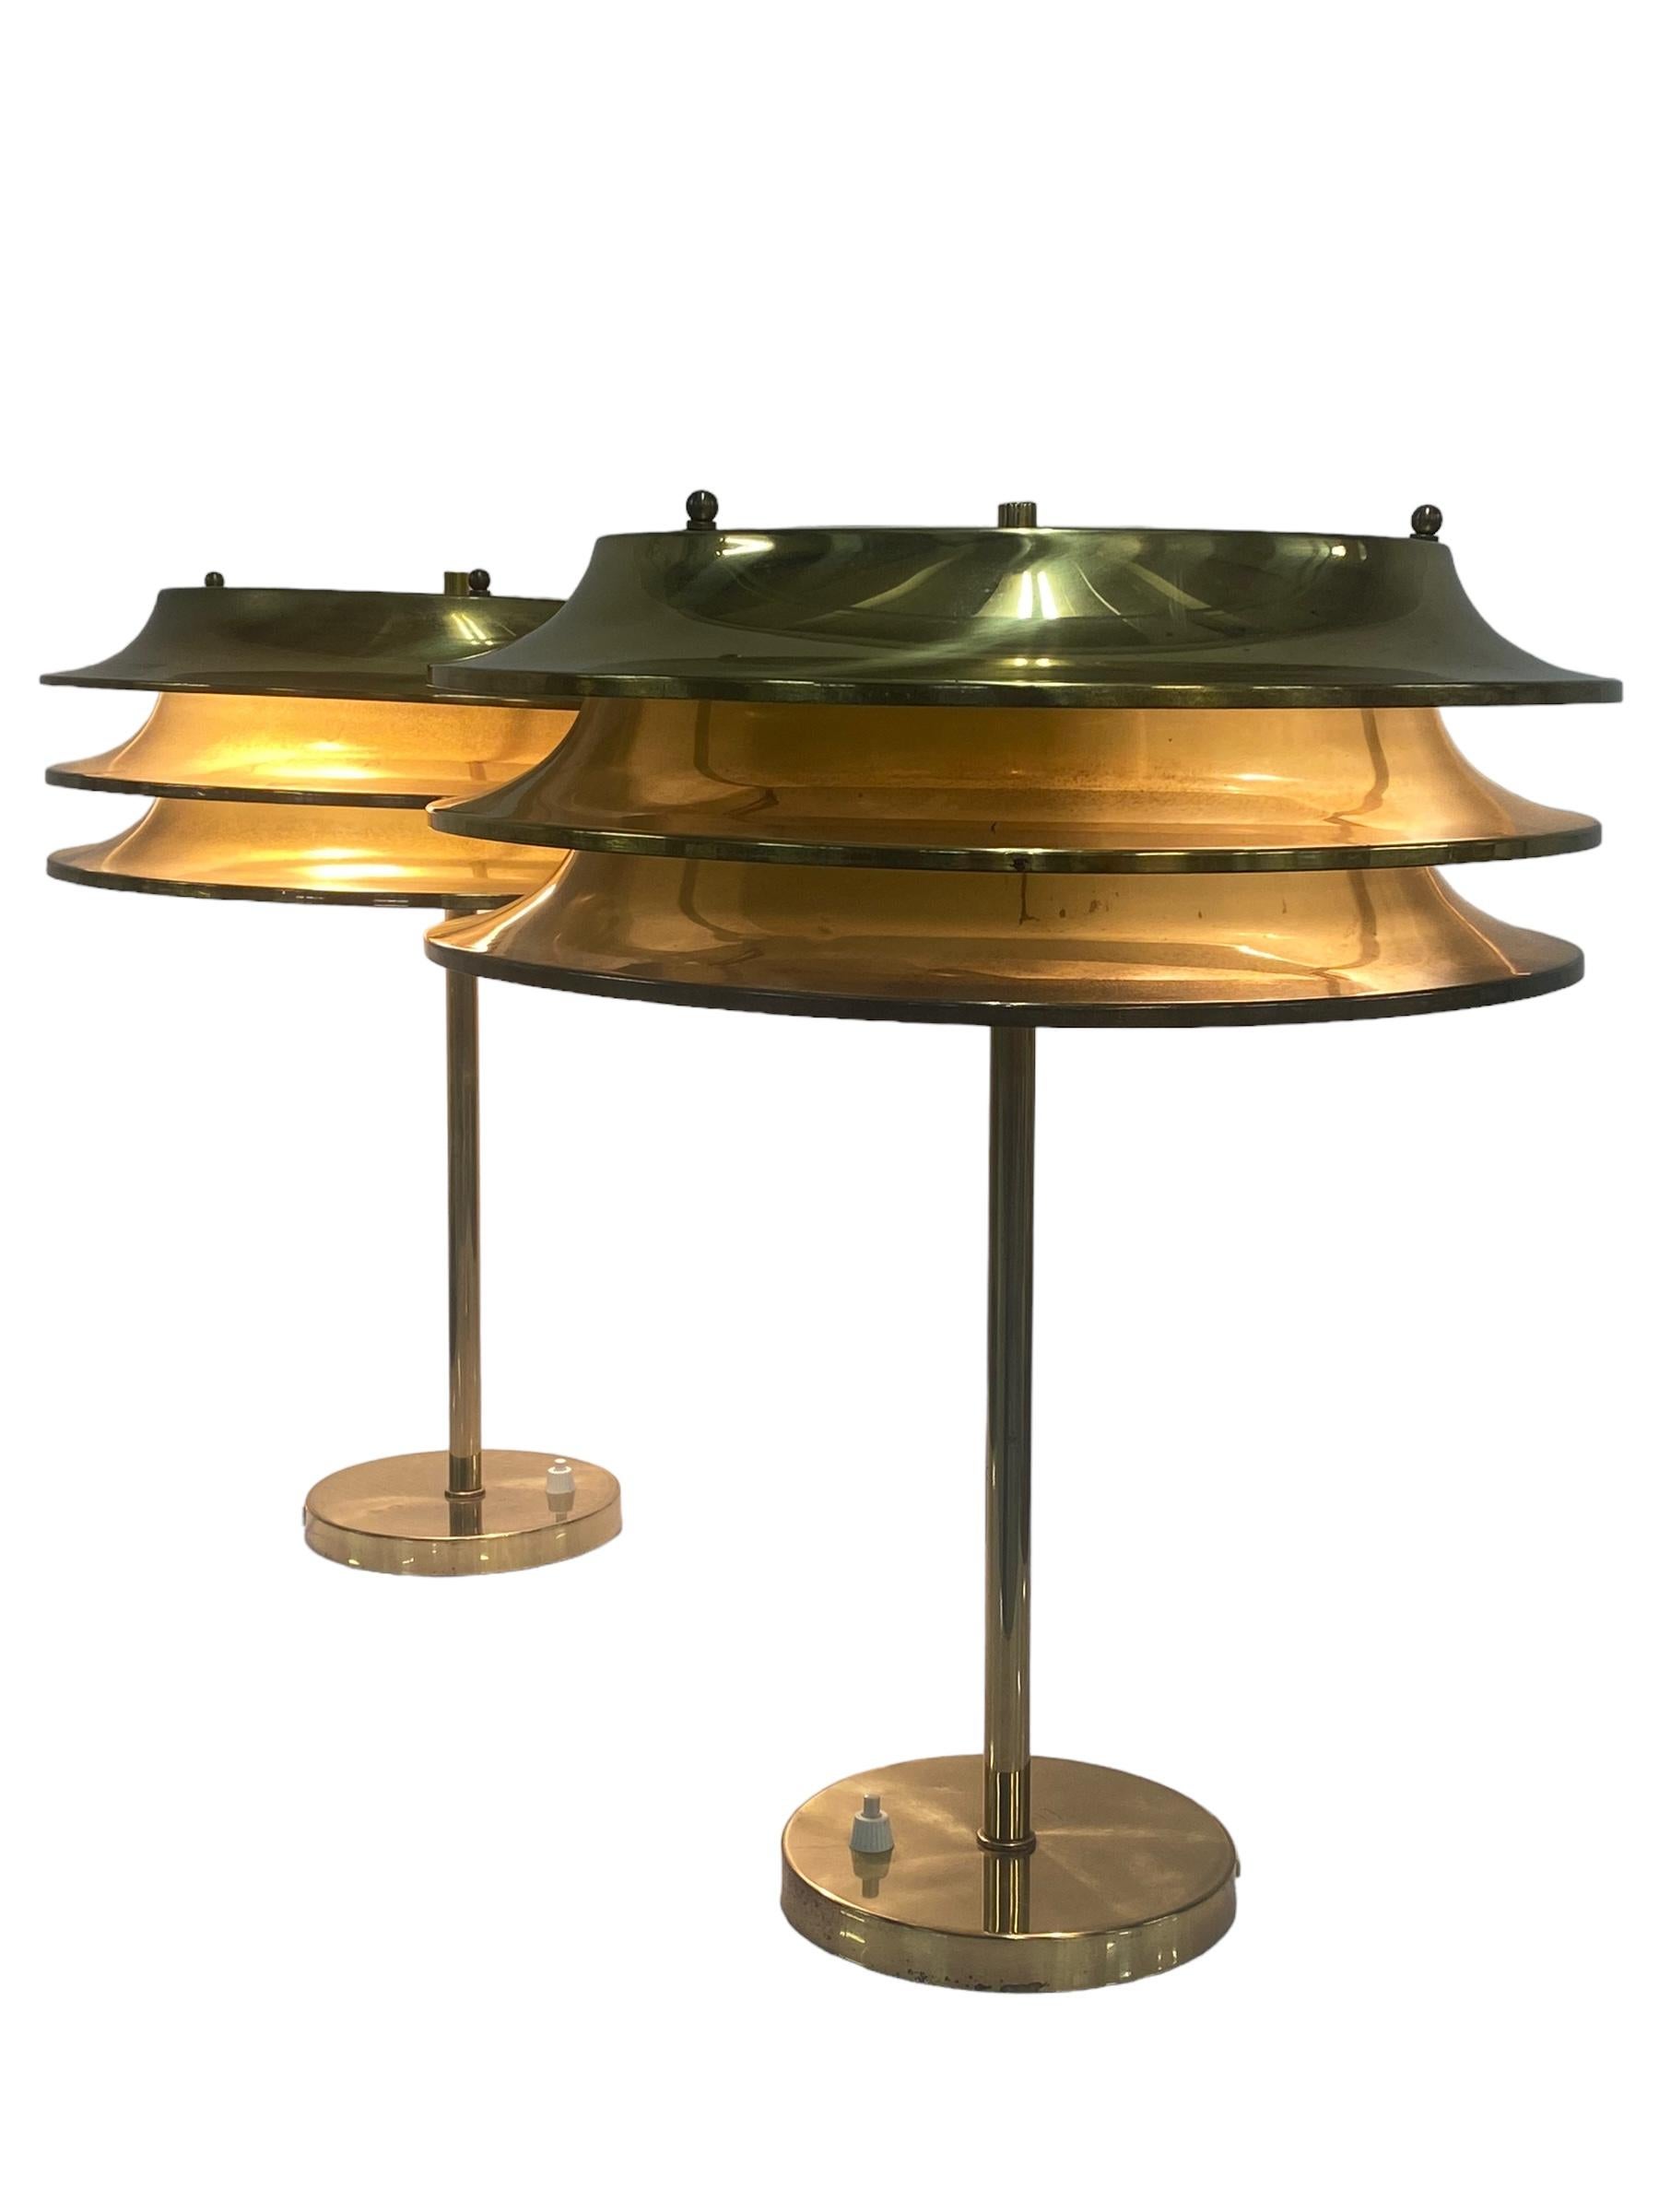 This pair of lamps was designed by Kai Ruokonen, originally for the Vaakuna Hotel in Helsinki in the 1970s. The same model was also used later in the Palace Hotel Helsinki. Very simple yet elegant heavy duty lamps in full brass with a beautiful